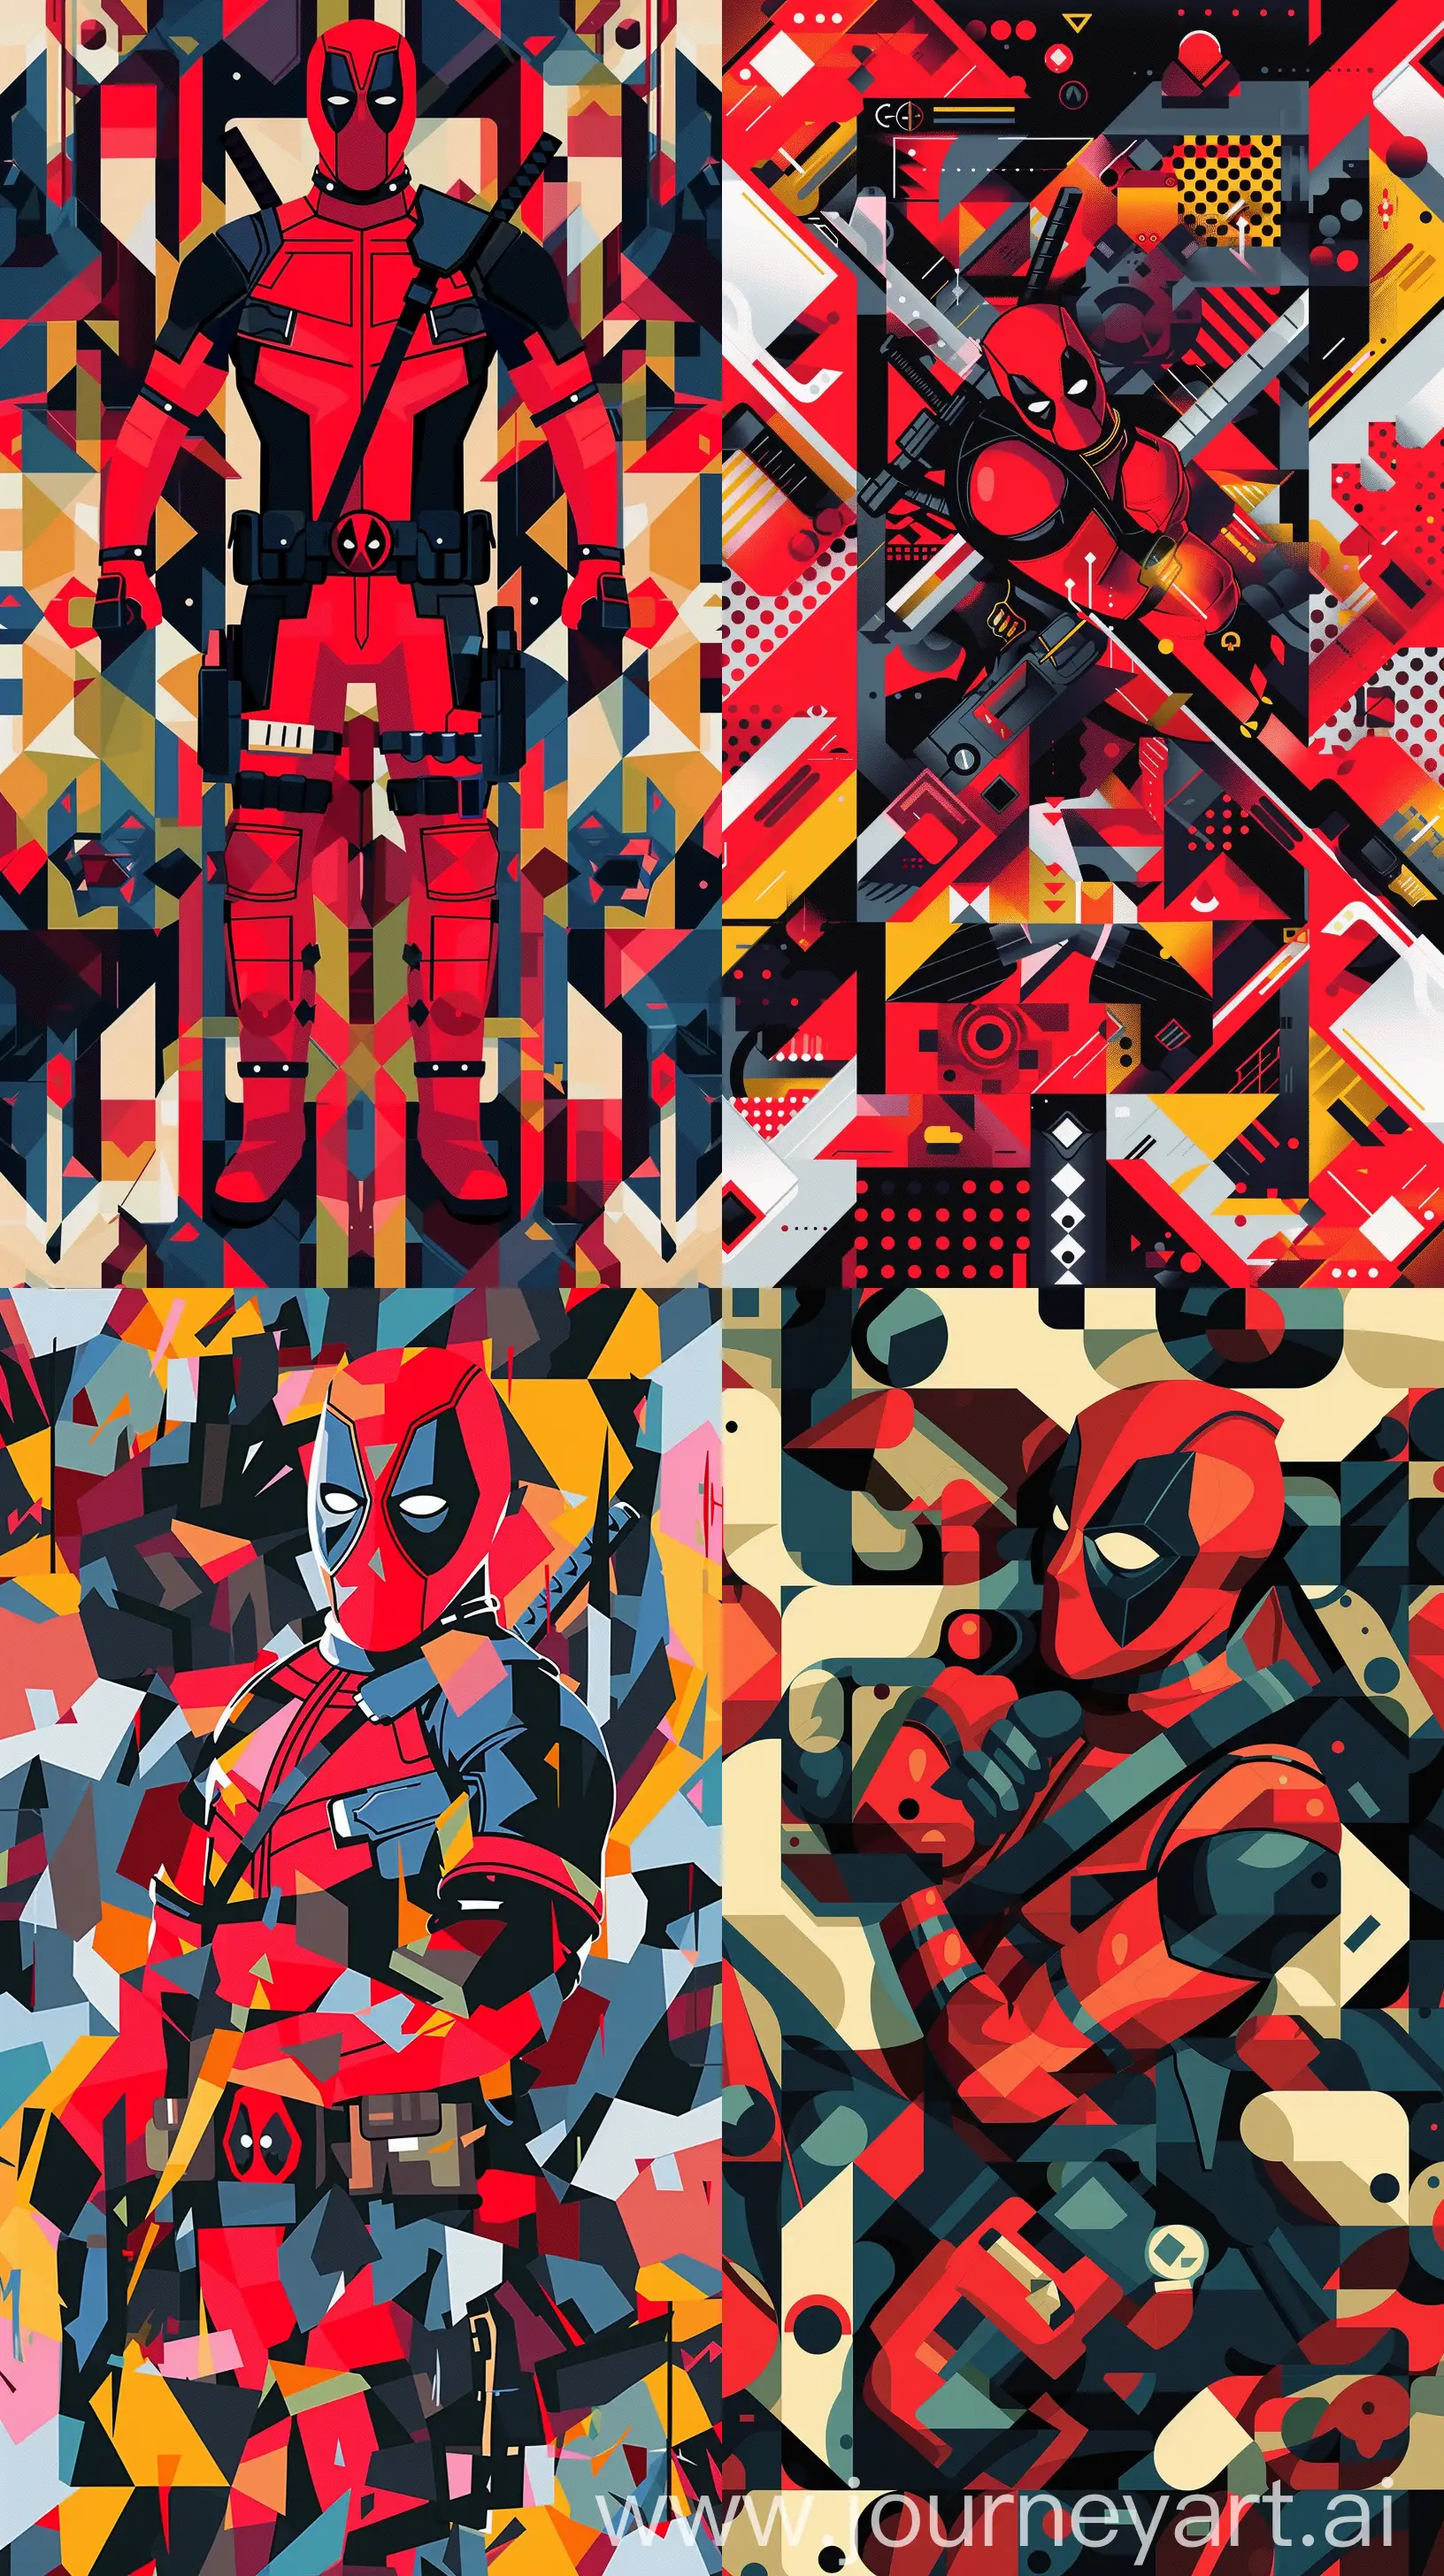 Bold-and-Colorful-Deadpool-Inspired-Geometric-Wallpaper